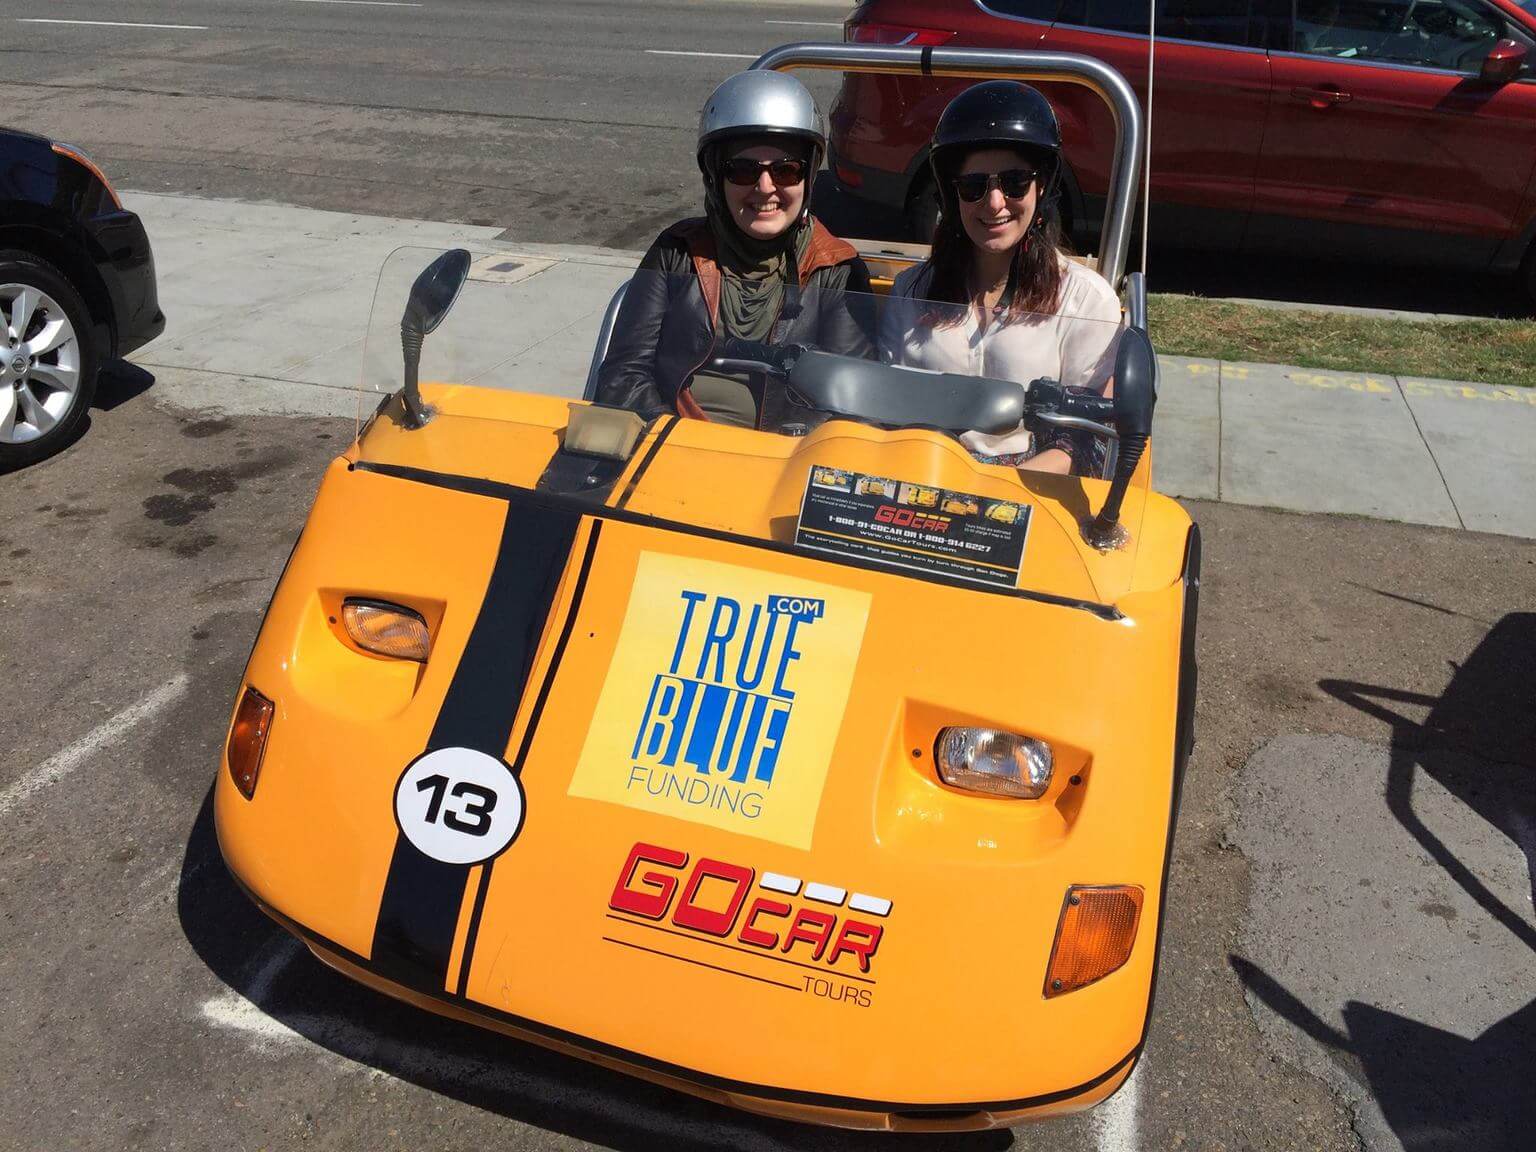 A photo of Mona Minkara and another person in a yellow go kart. Both are wearing helmets and are smiling for the camera. 